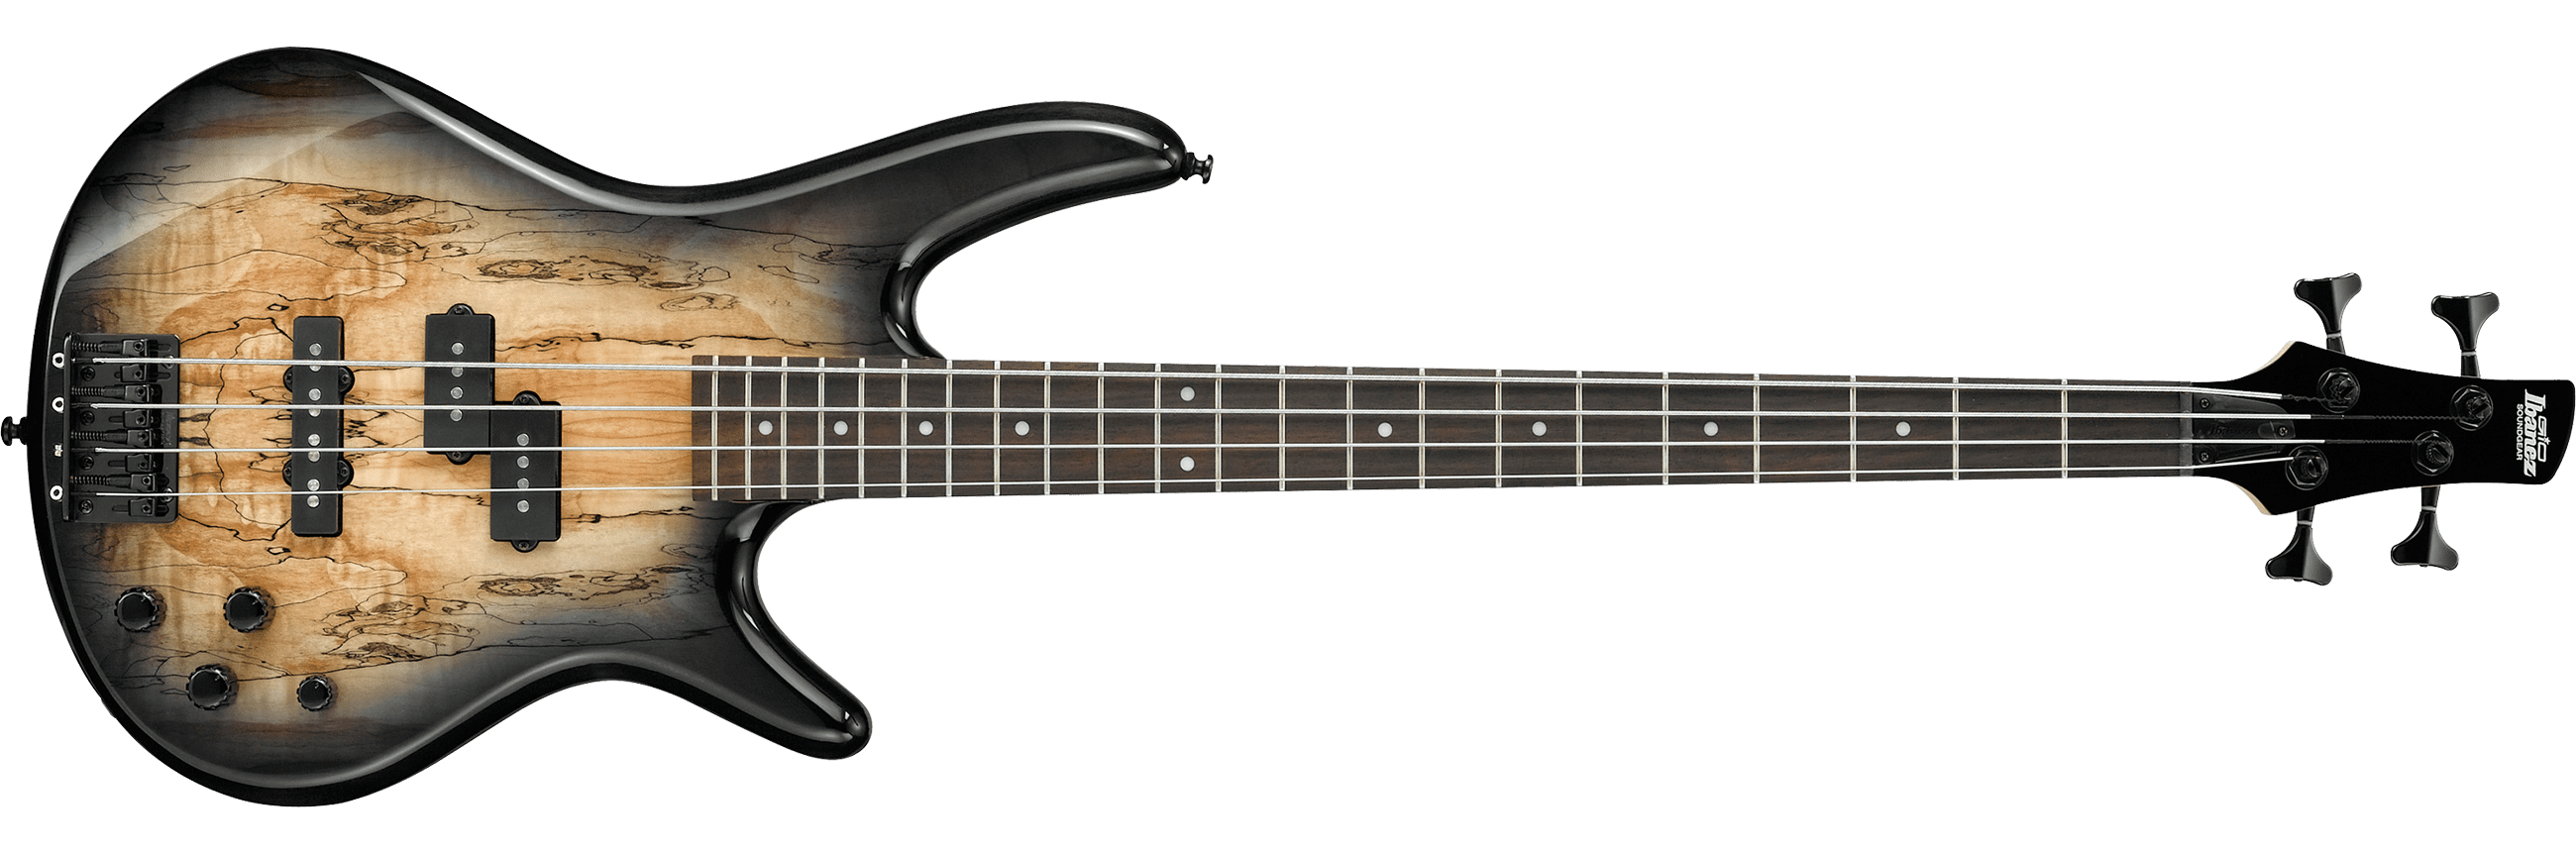 Ibanez 4 String Bass Guitar Review